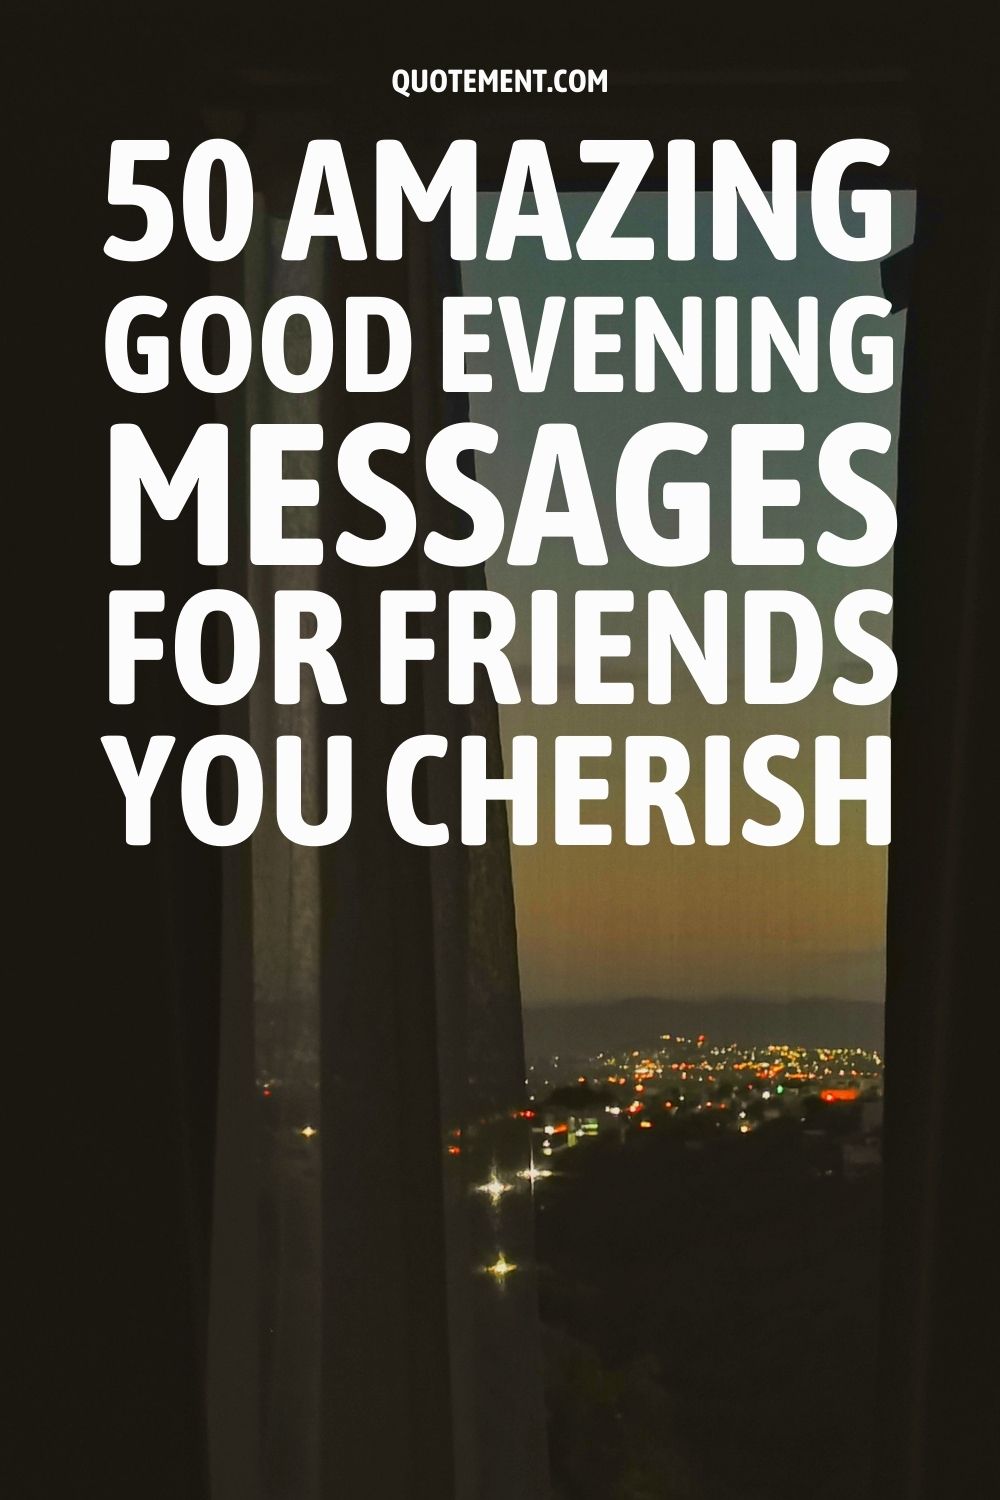 50 Amazing Good Evening Messages For Friends You Cherish
